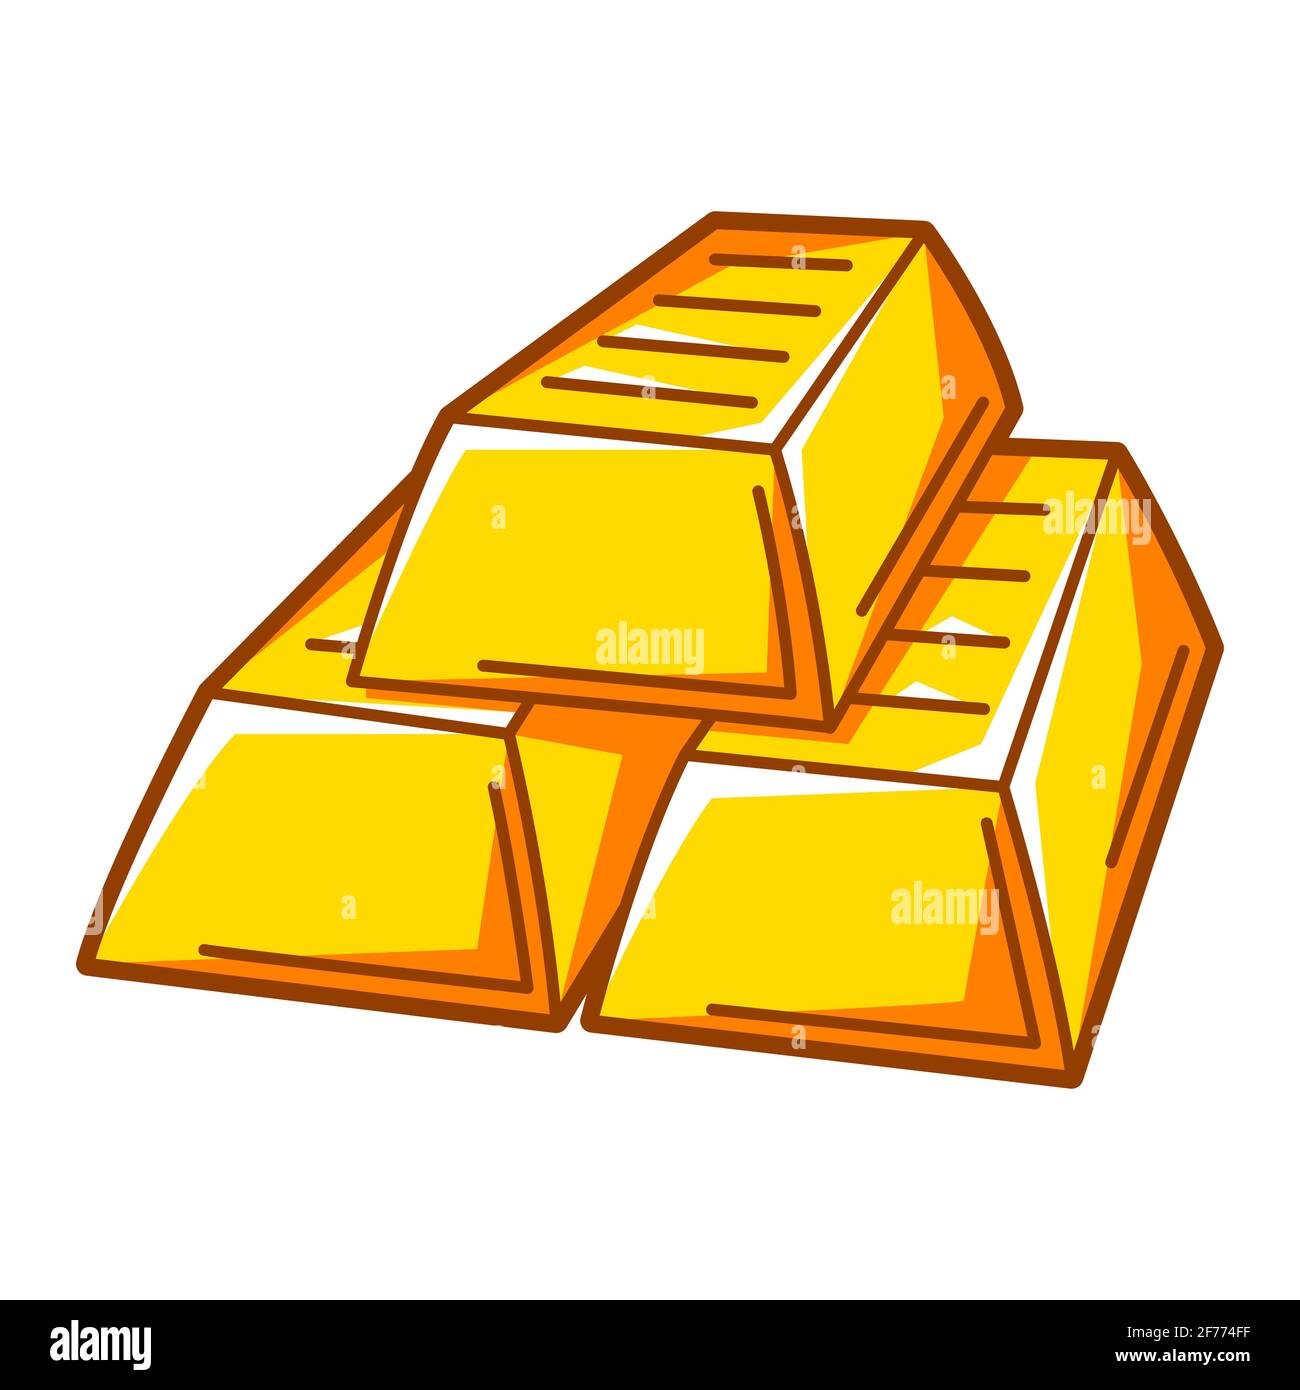 Illustration of gold bars stack. Banking and finance icon. Stock Vector